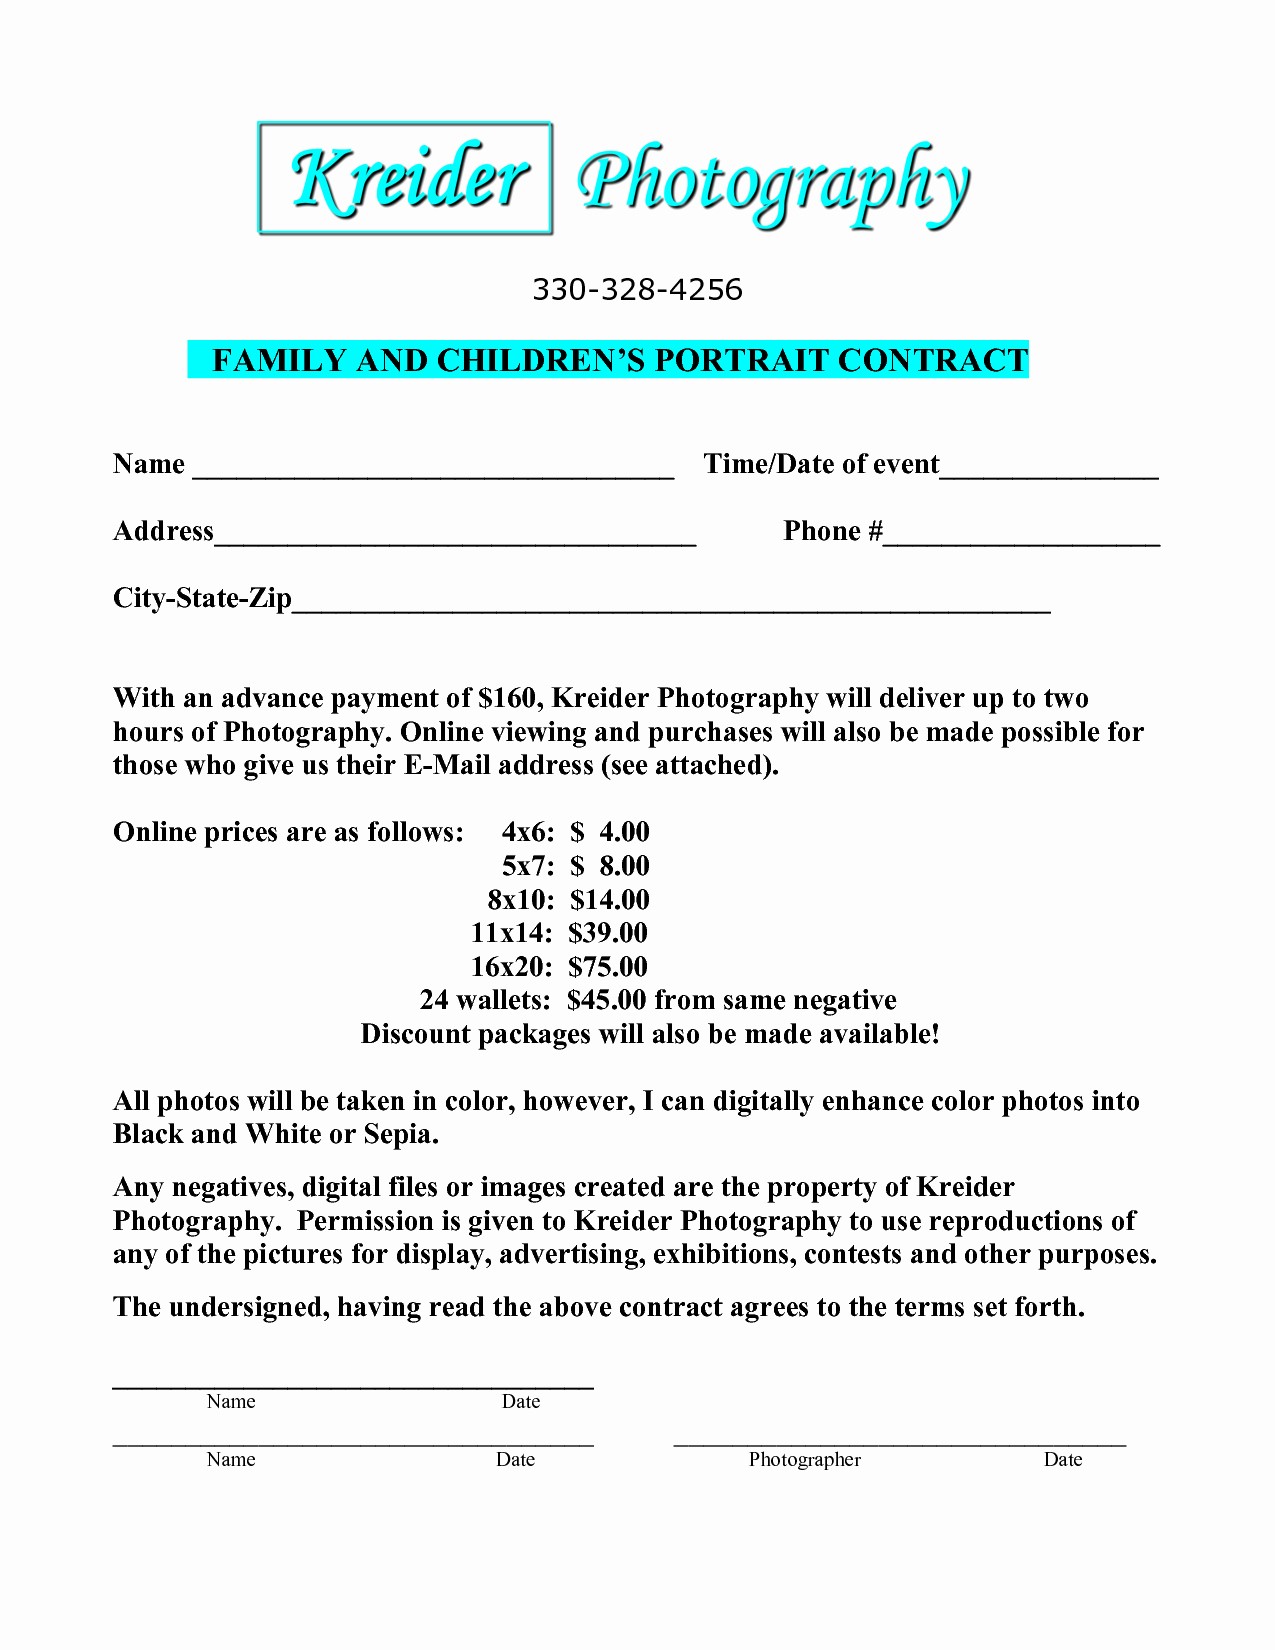 Family Photography Contract Template Best Of Index Cdn 4 2007 861